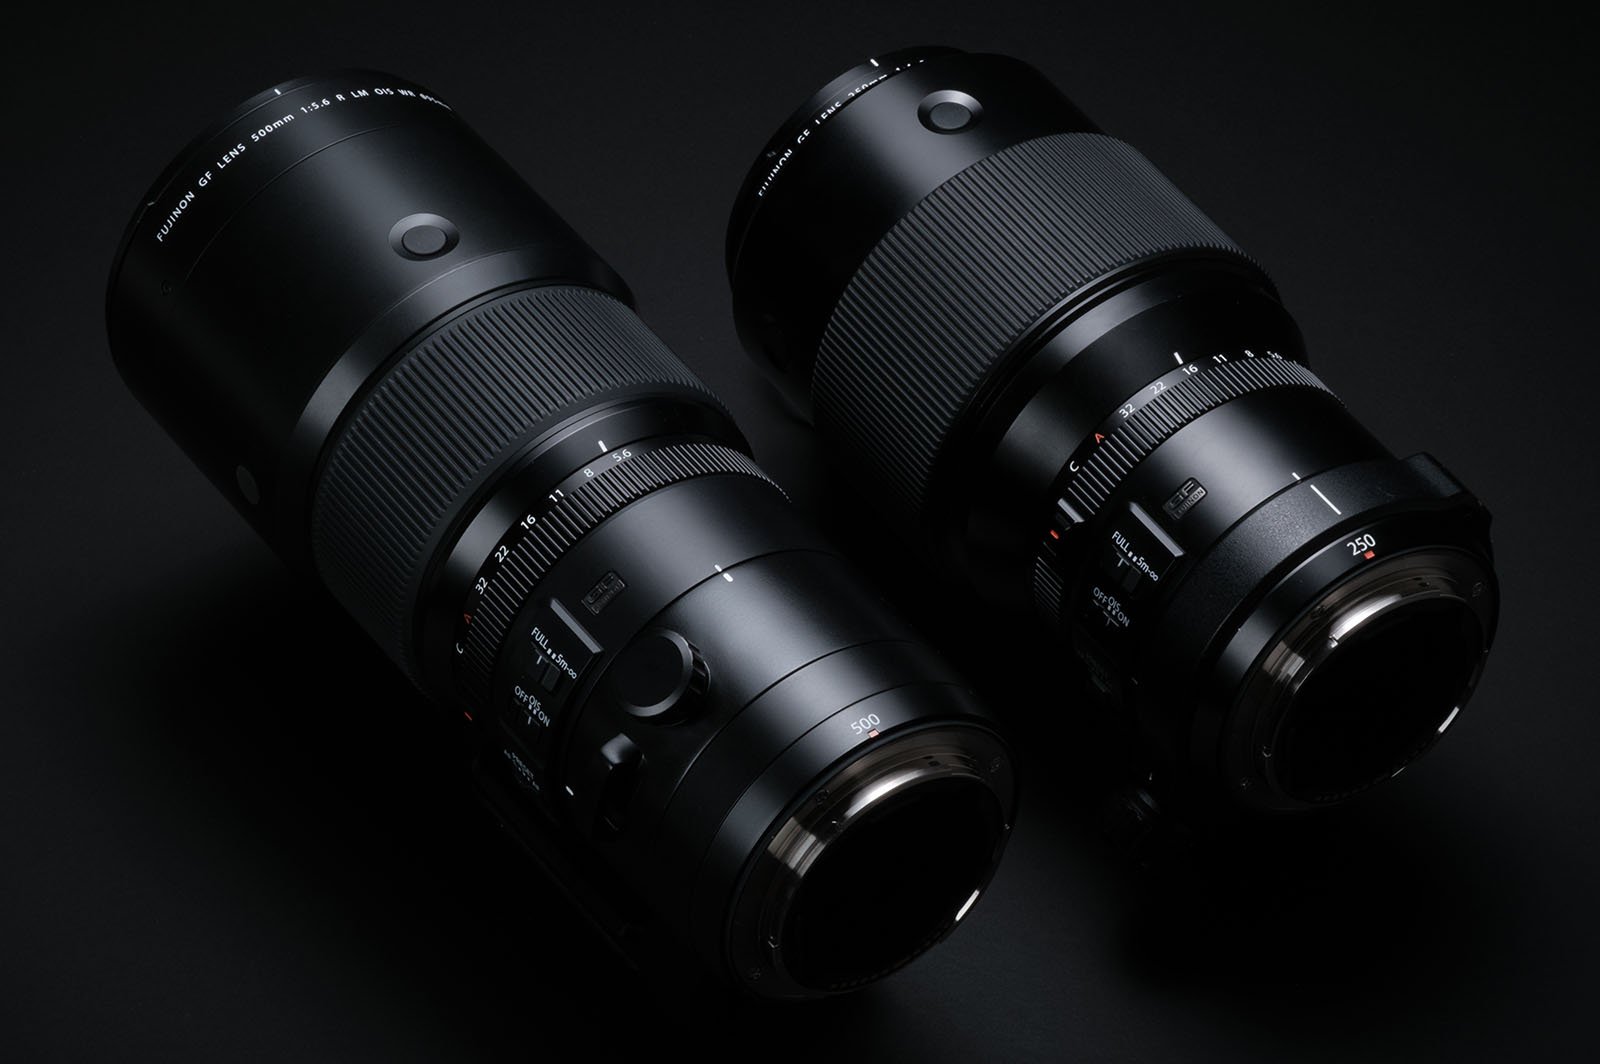 Two black, professional camera lenses are placed side by side on a dark background. The lenses are sleek and feature various control dials and focus rings. The lens on the left is slightly larger than the one on the right.